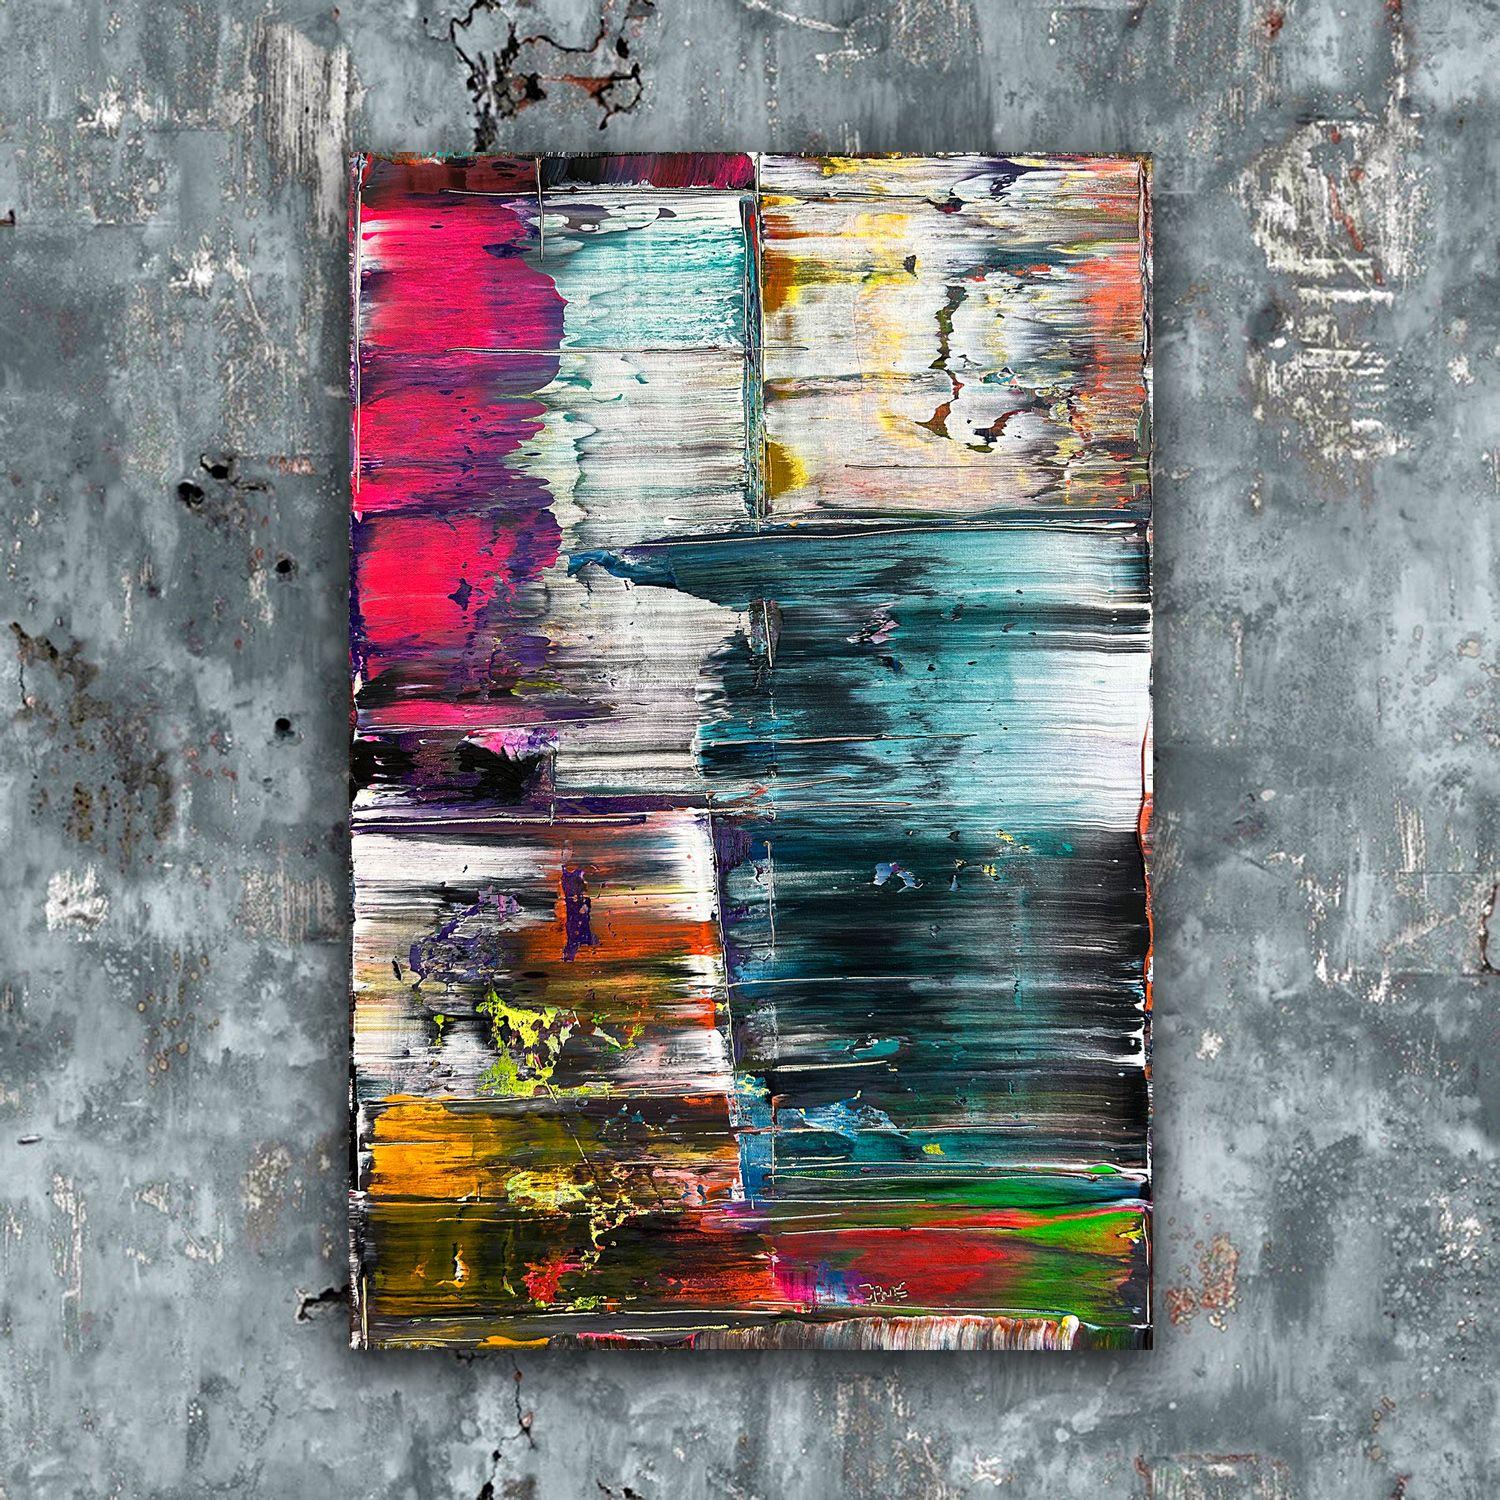 This is a gallery quality, PMS abstract acrylic painting for your home or office. It was painted with the highest quality materials and will make a statement in your space. This piece has a mature, cool and vibrant neutral design aesthetic. It is a